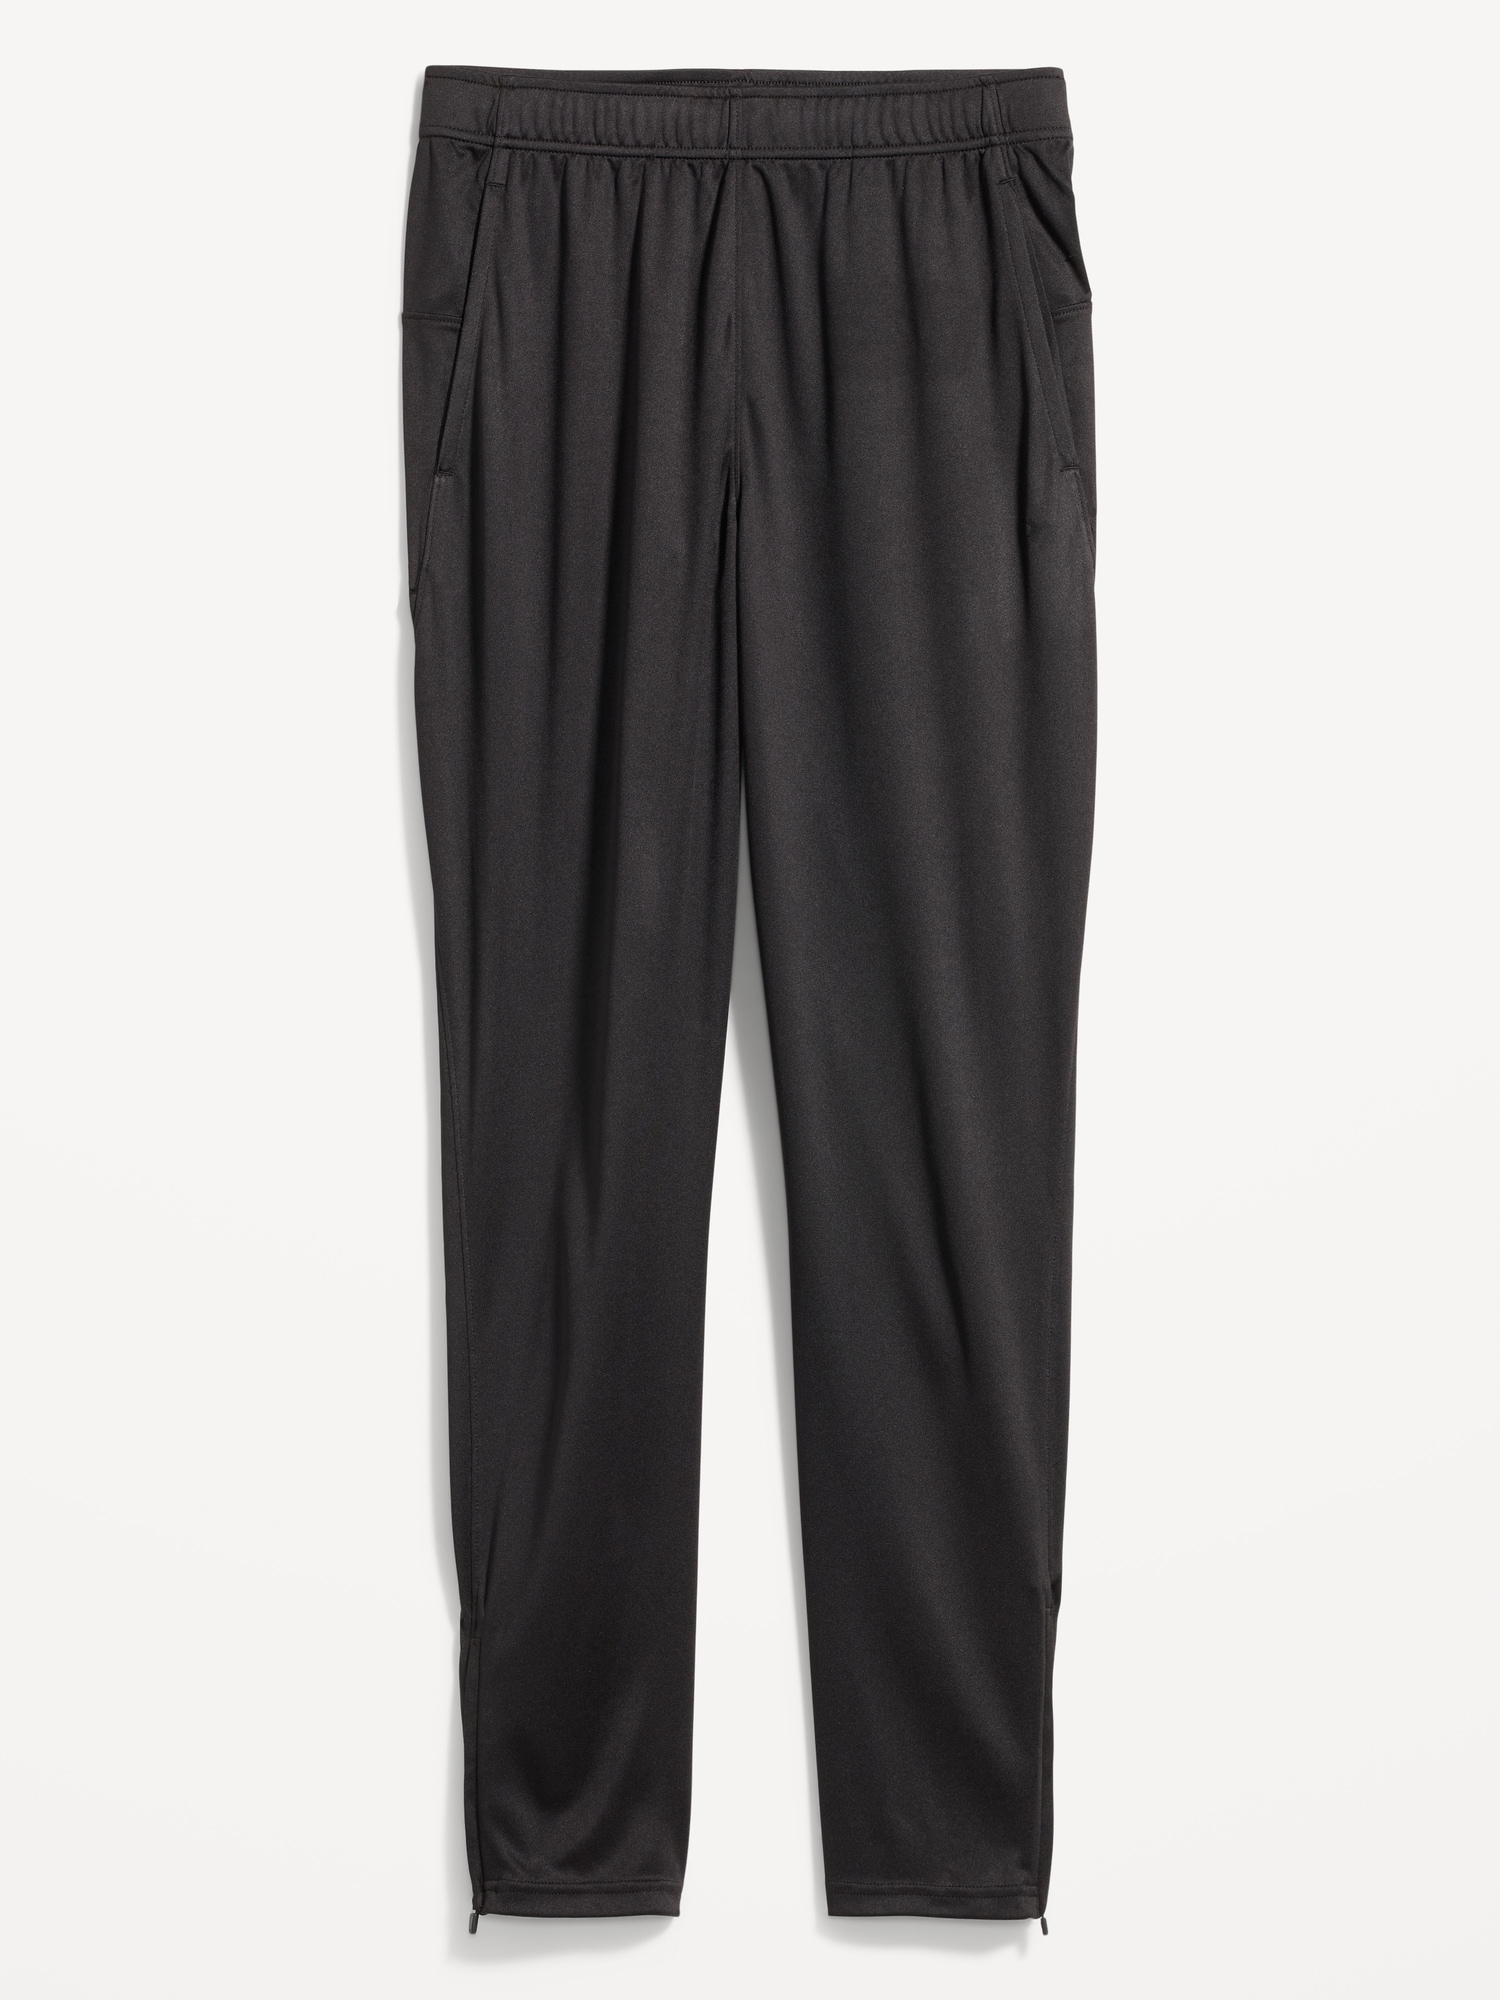 Old Navy Go-Dry Tapered Performance Sweatpants black. 1